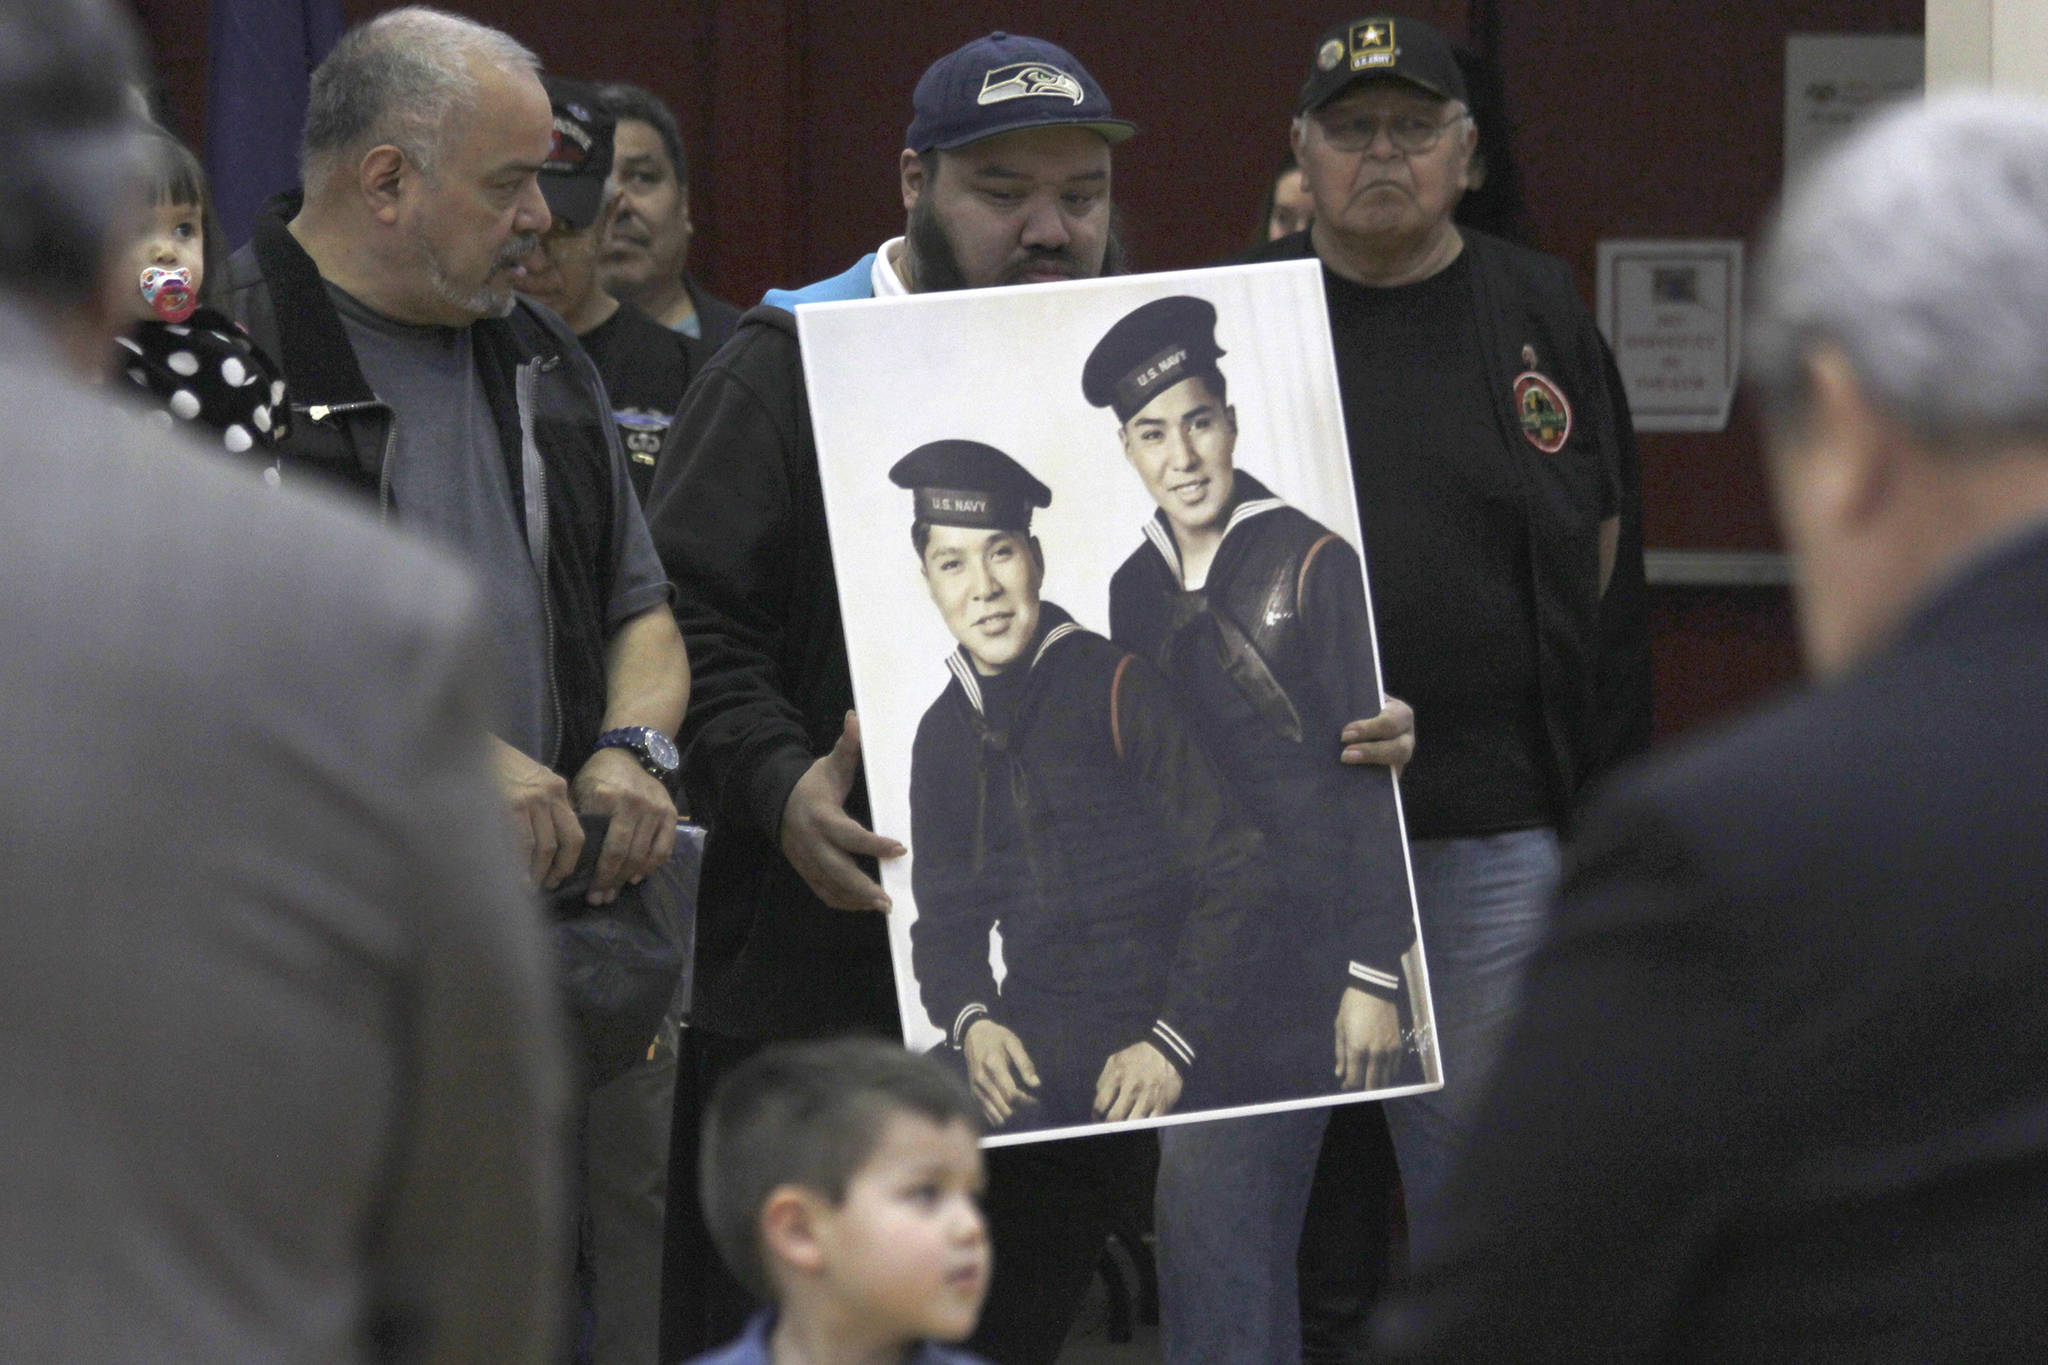 Silent in life, Tlingit code talkers finally getting recognition